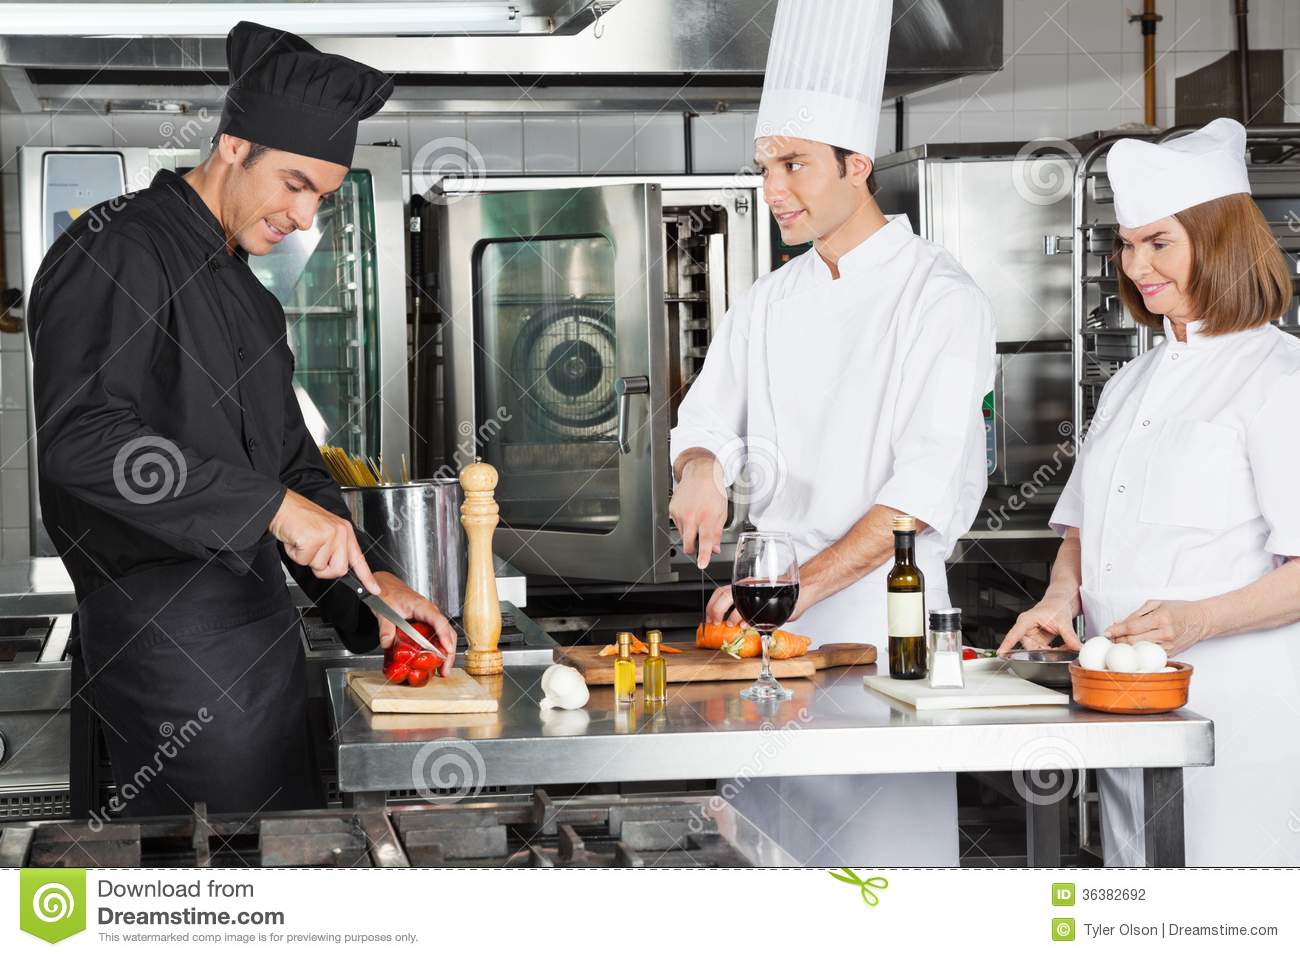 Chefs Working In Commercial Kitchen Stock Photography   Image    